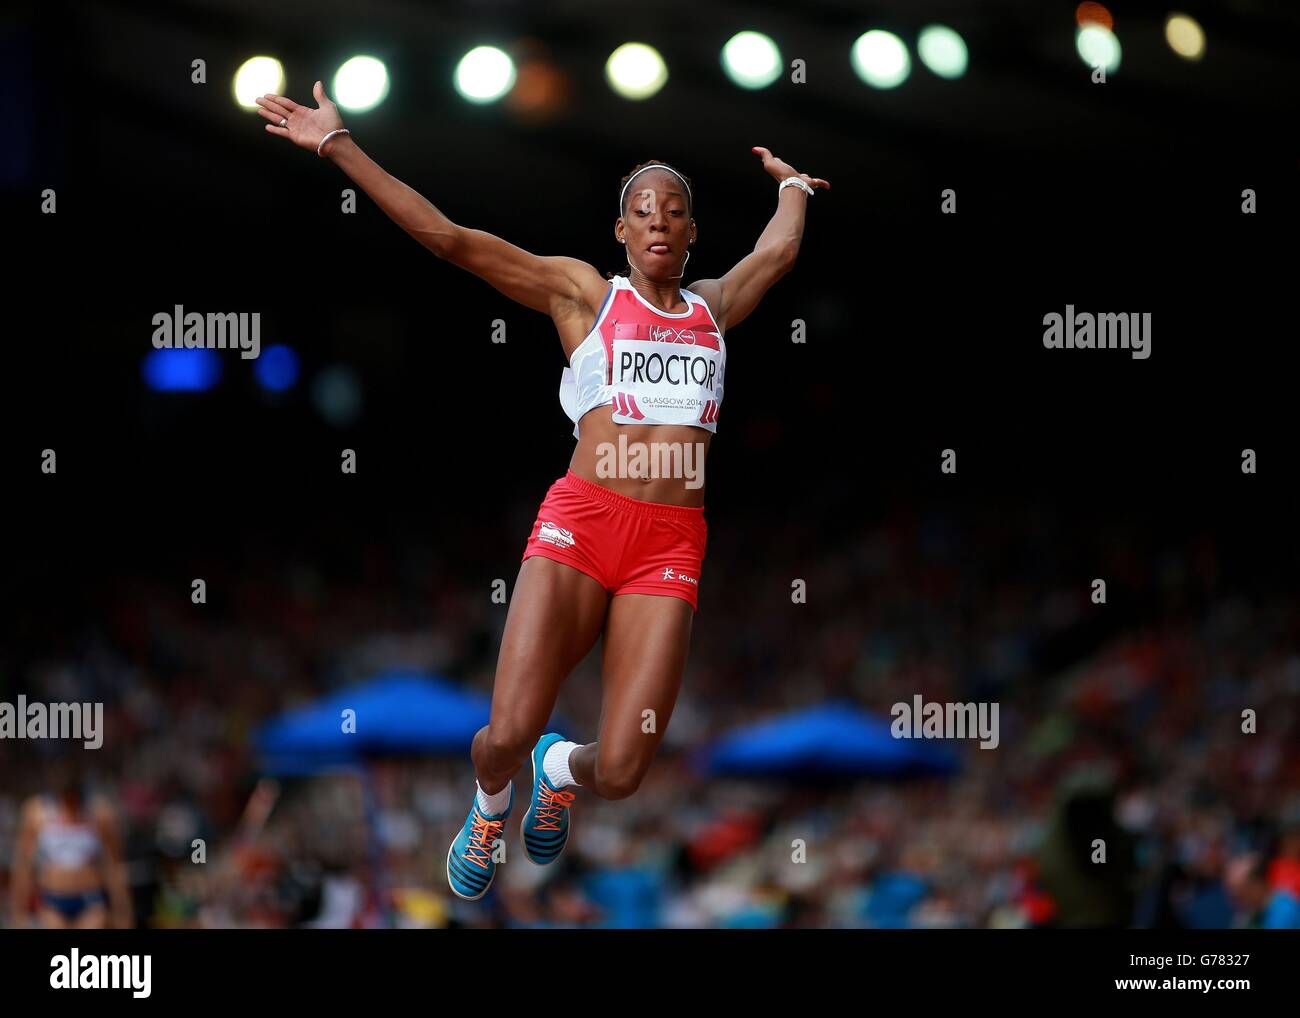 England's Shara Proctor during the Women's Long Jump qualifying at Hampden Park, during the 2014 Commonwealth Games in Glasgow. Stock Photo